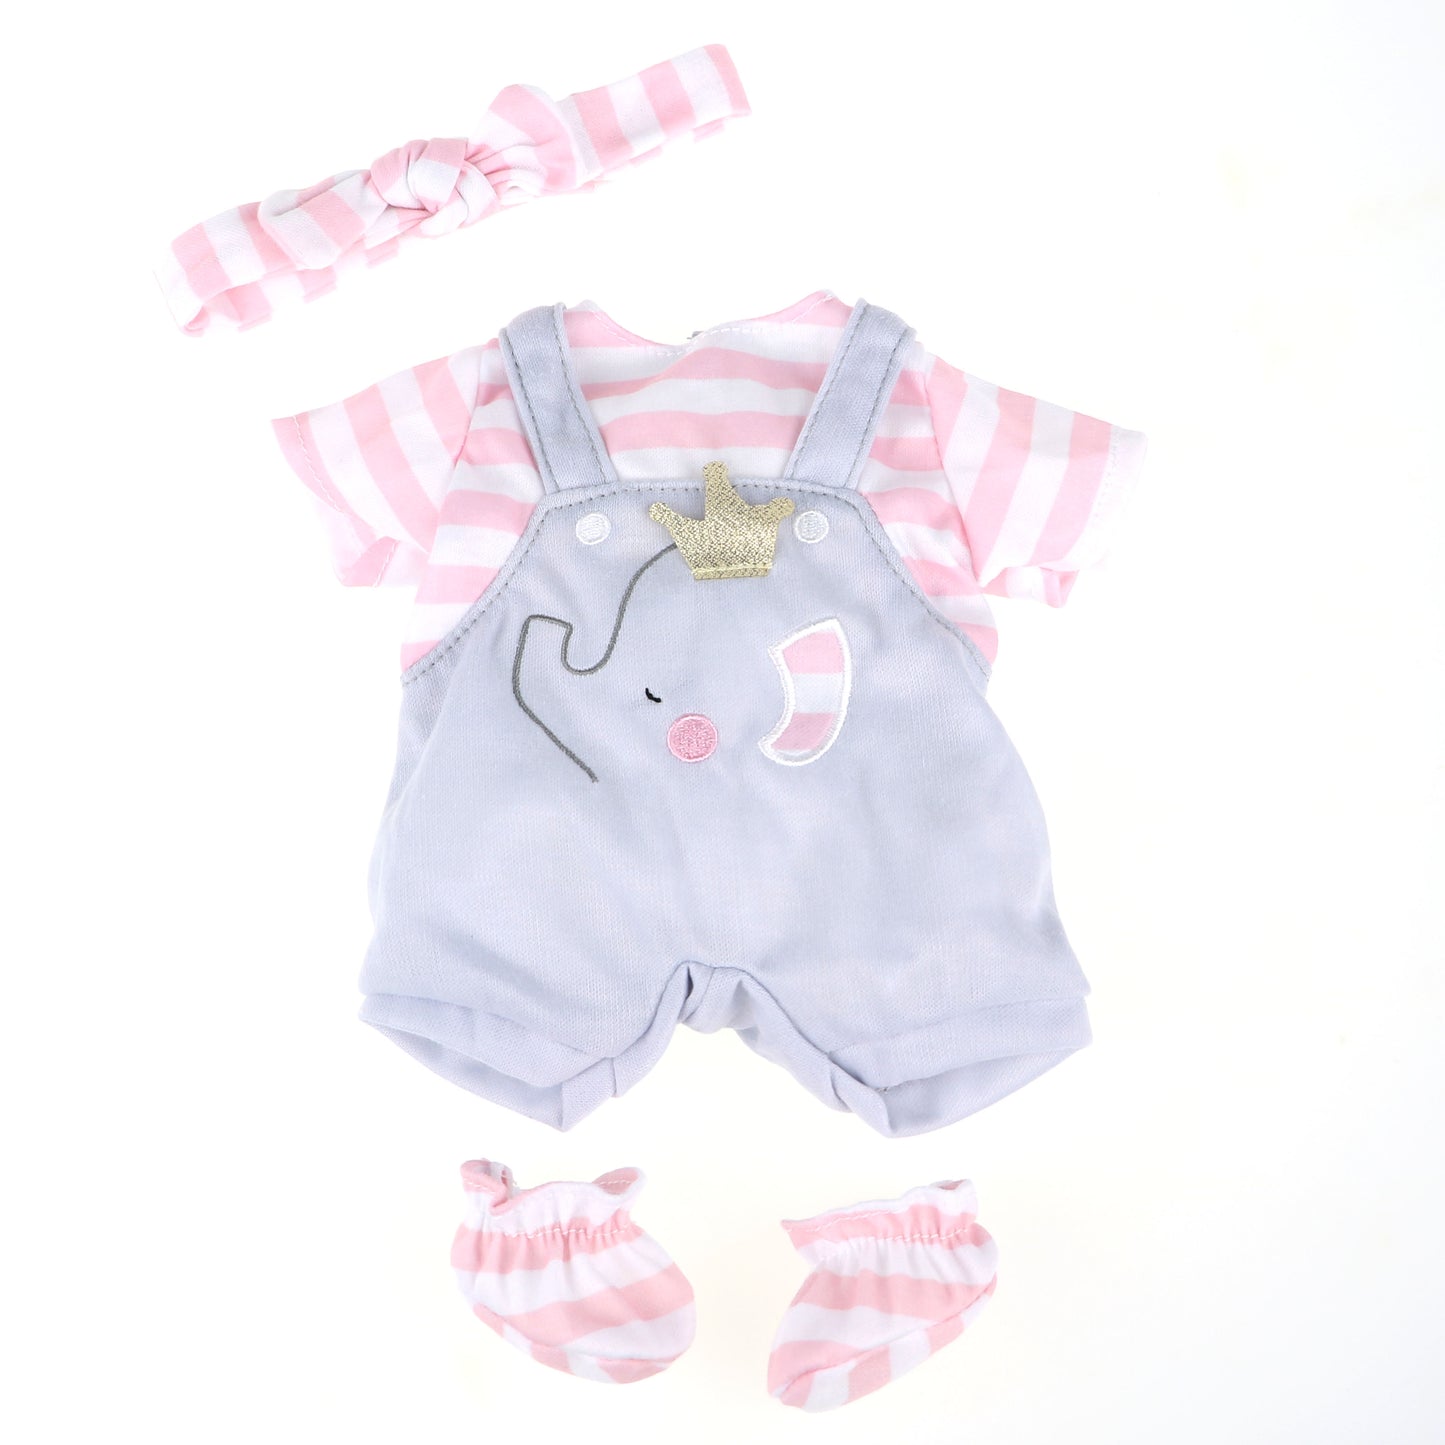 JC Toys Berenguer Boutique Baby Doll Outfit Gray Overall Shorts with Pink Stripes Includes Headband and Booties